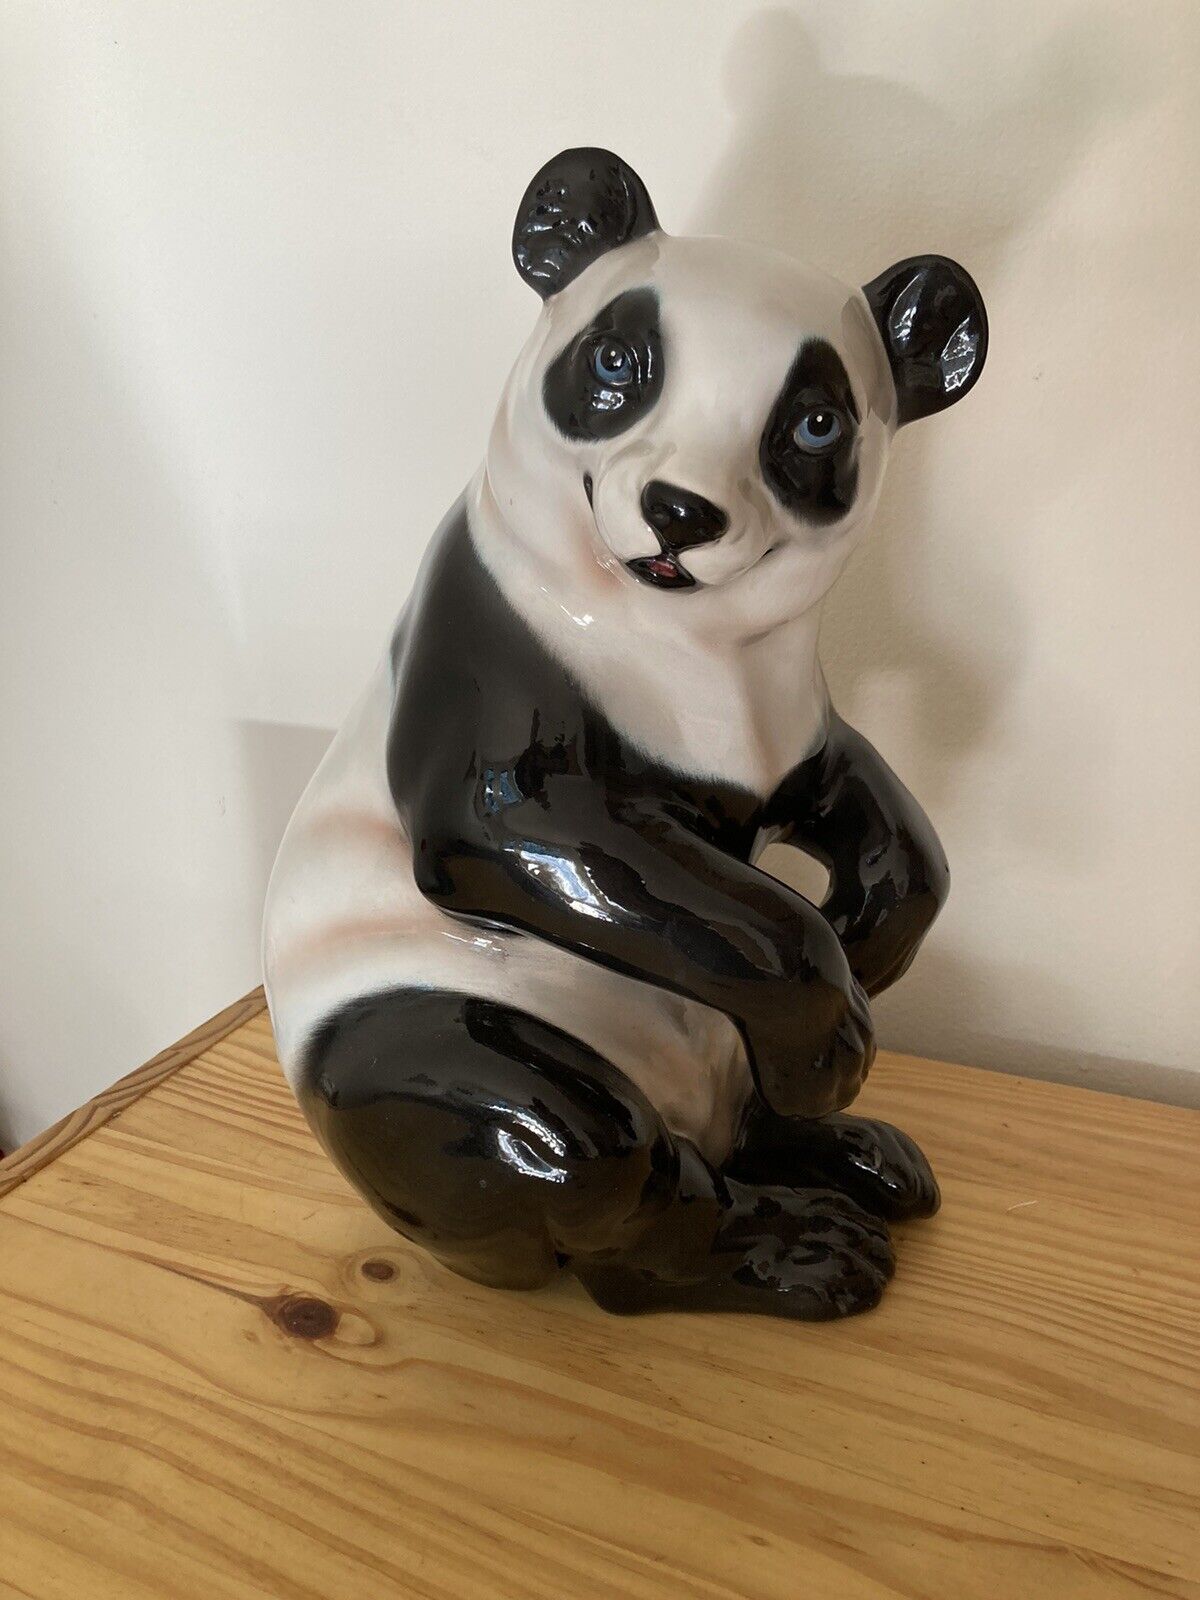 Vintage Ceramic Panda Ronzan Made In Italy Signed And Numbered 14” Tall 1471/1